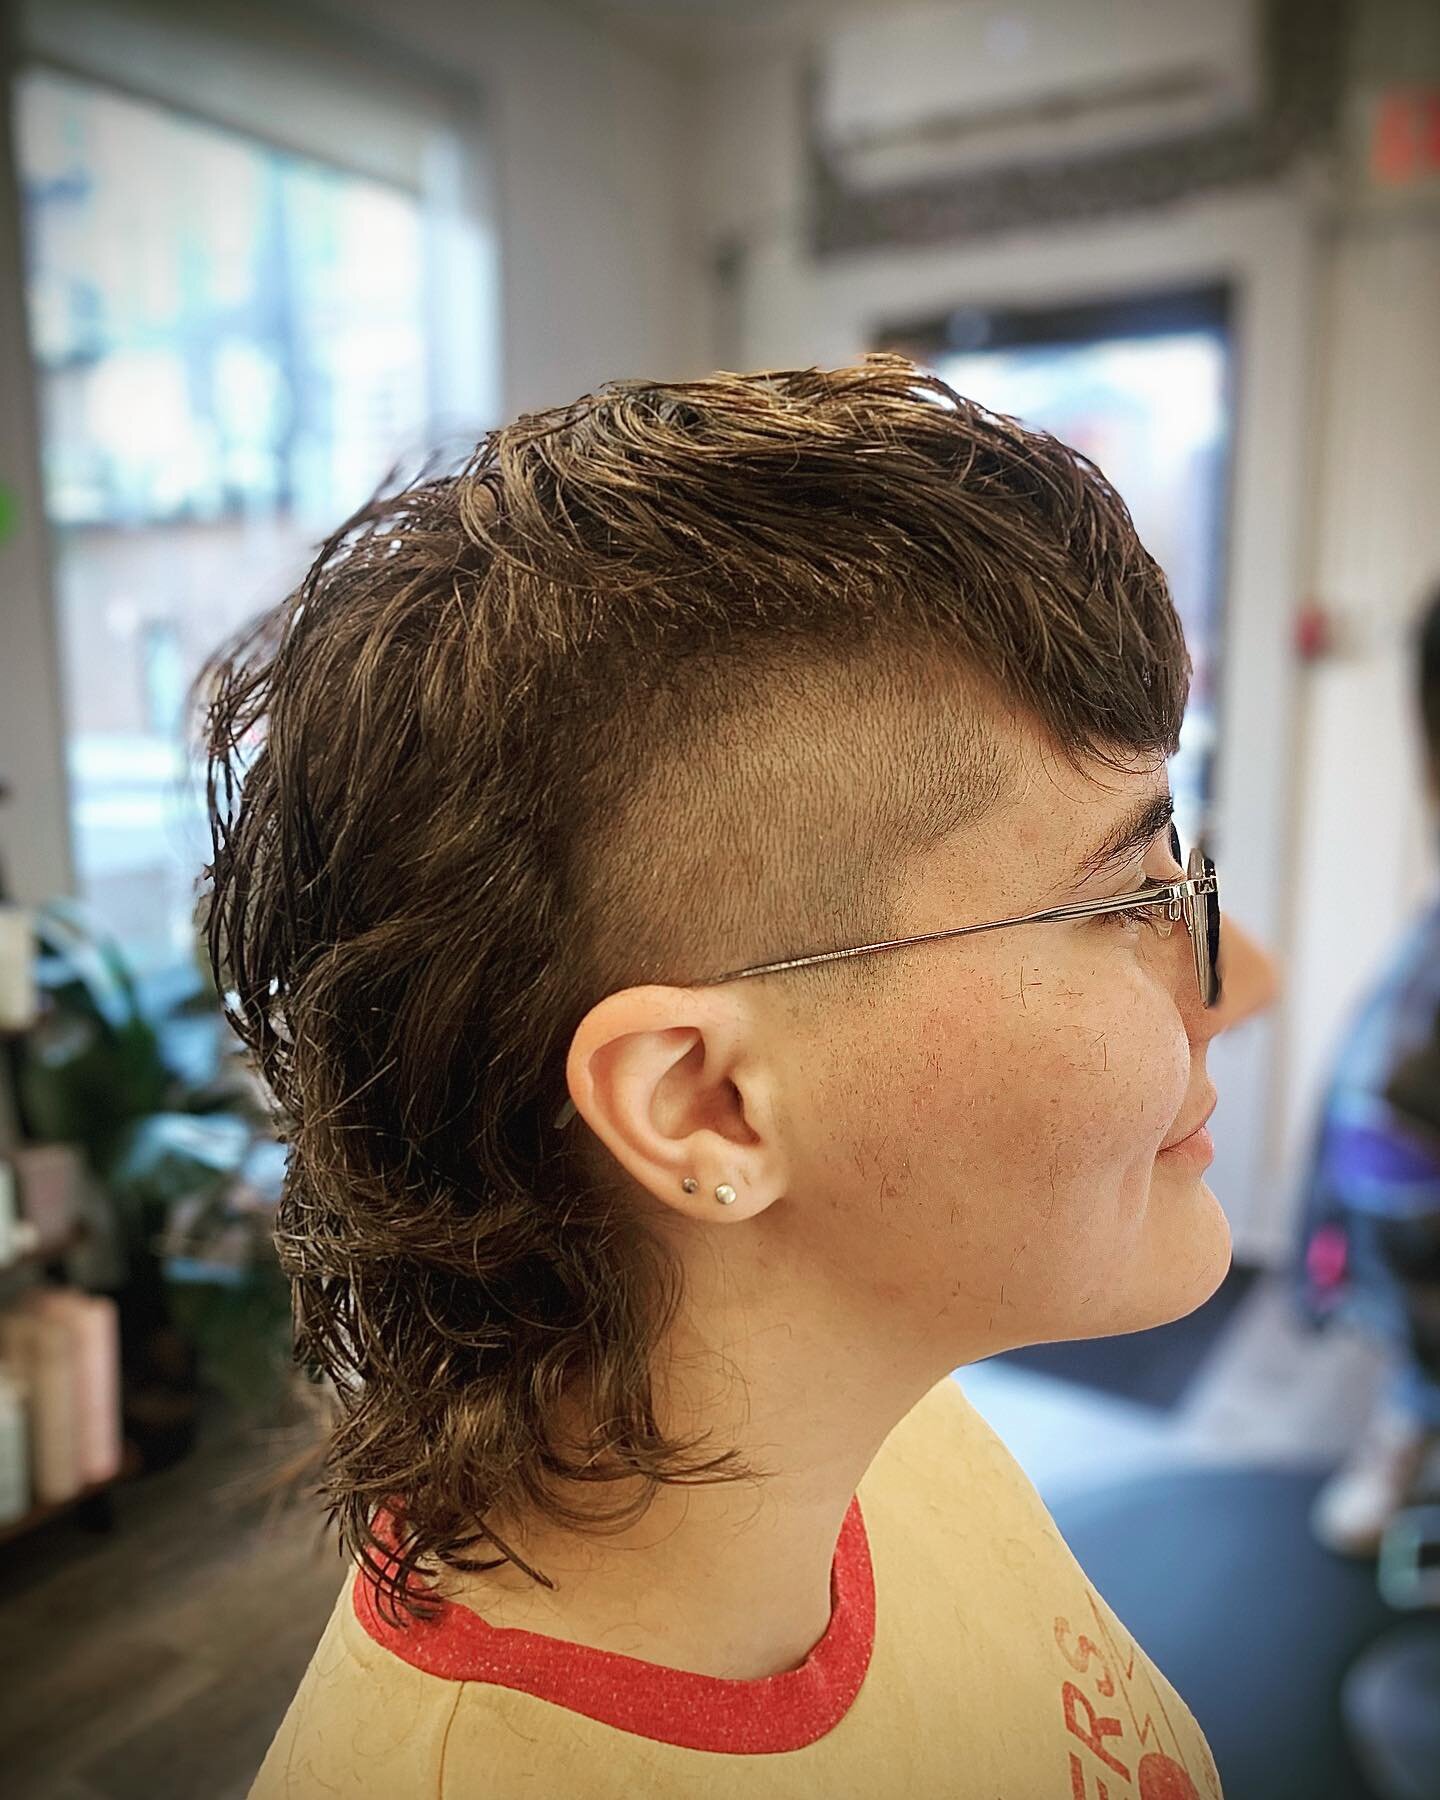 Here&rsquo;s a super fun curly mullet with shaved sides done by Shannon. Use our link in bio to Book your appointment with her today! #hkhairstudiophilly #hkhairstudio #phillies #philadelphiahair #philadelphiahairstylist #philadelphiahairsalon #phila